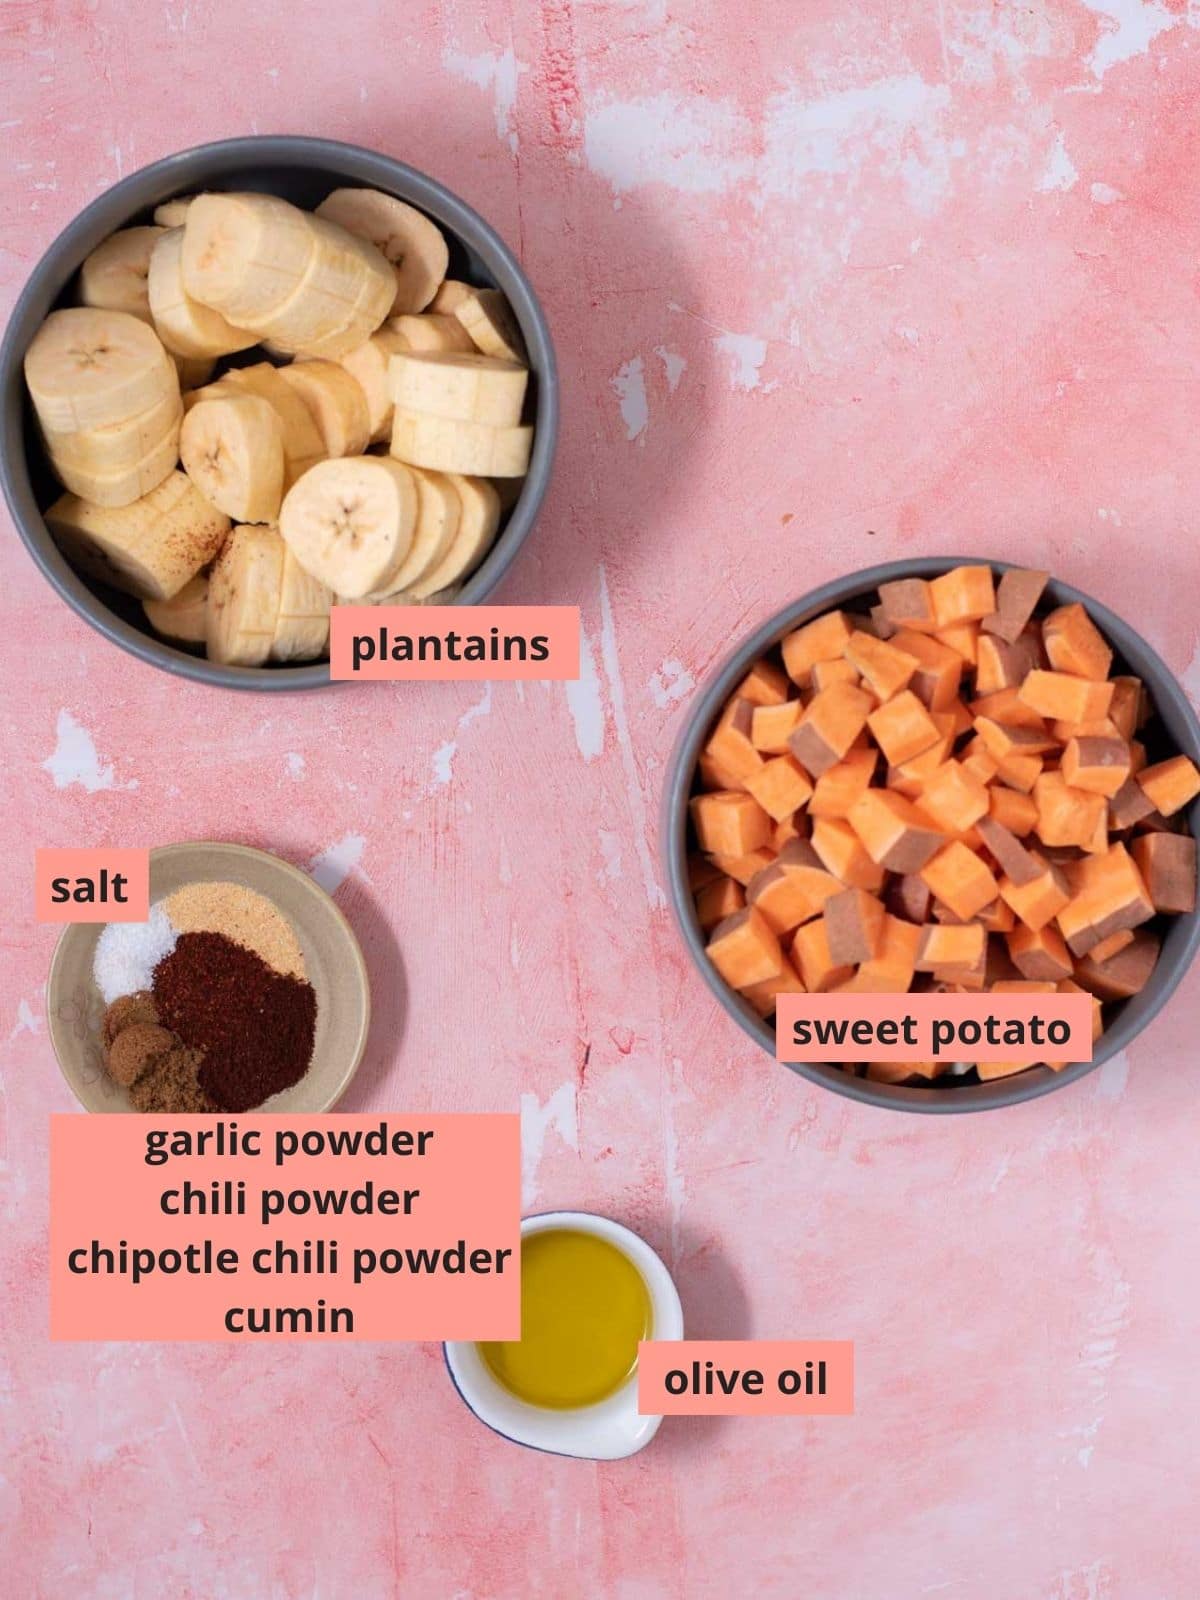 Labeled ingredients used to make sweet potato tacos